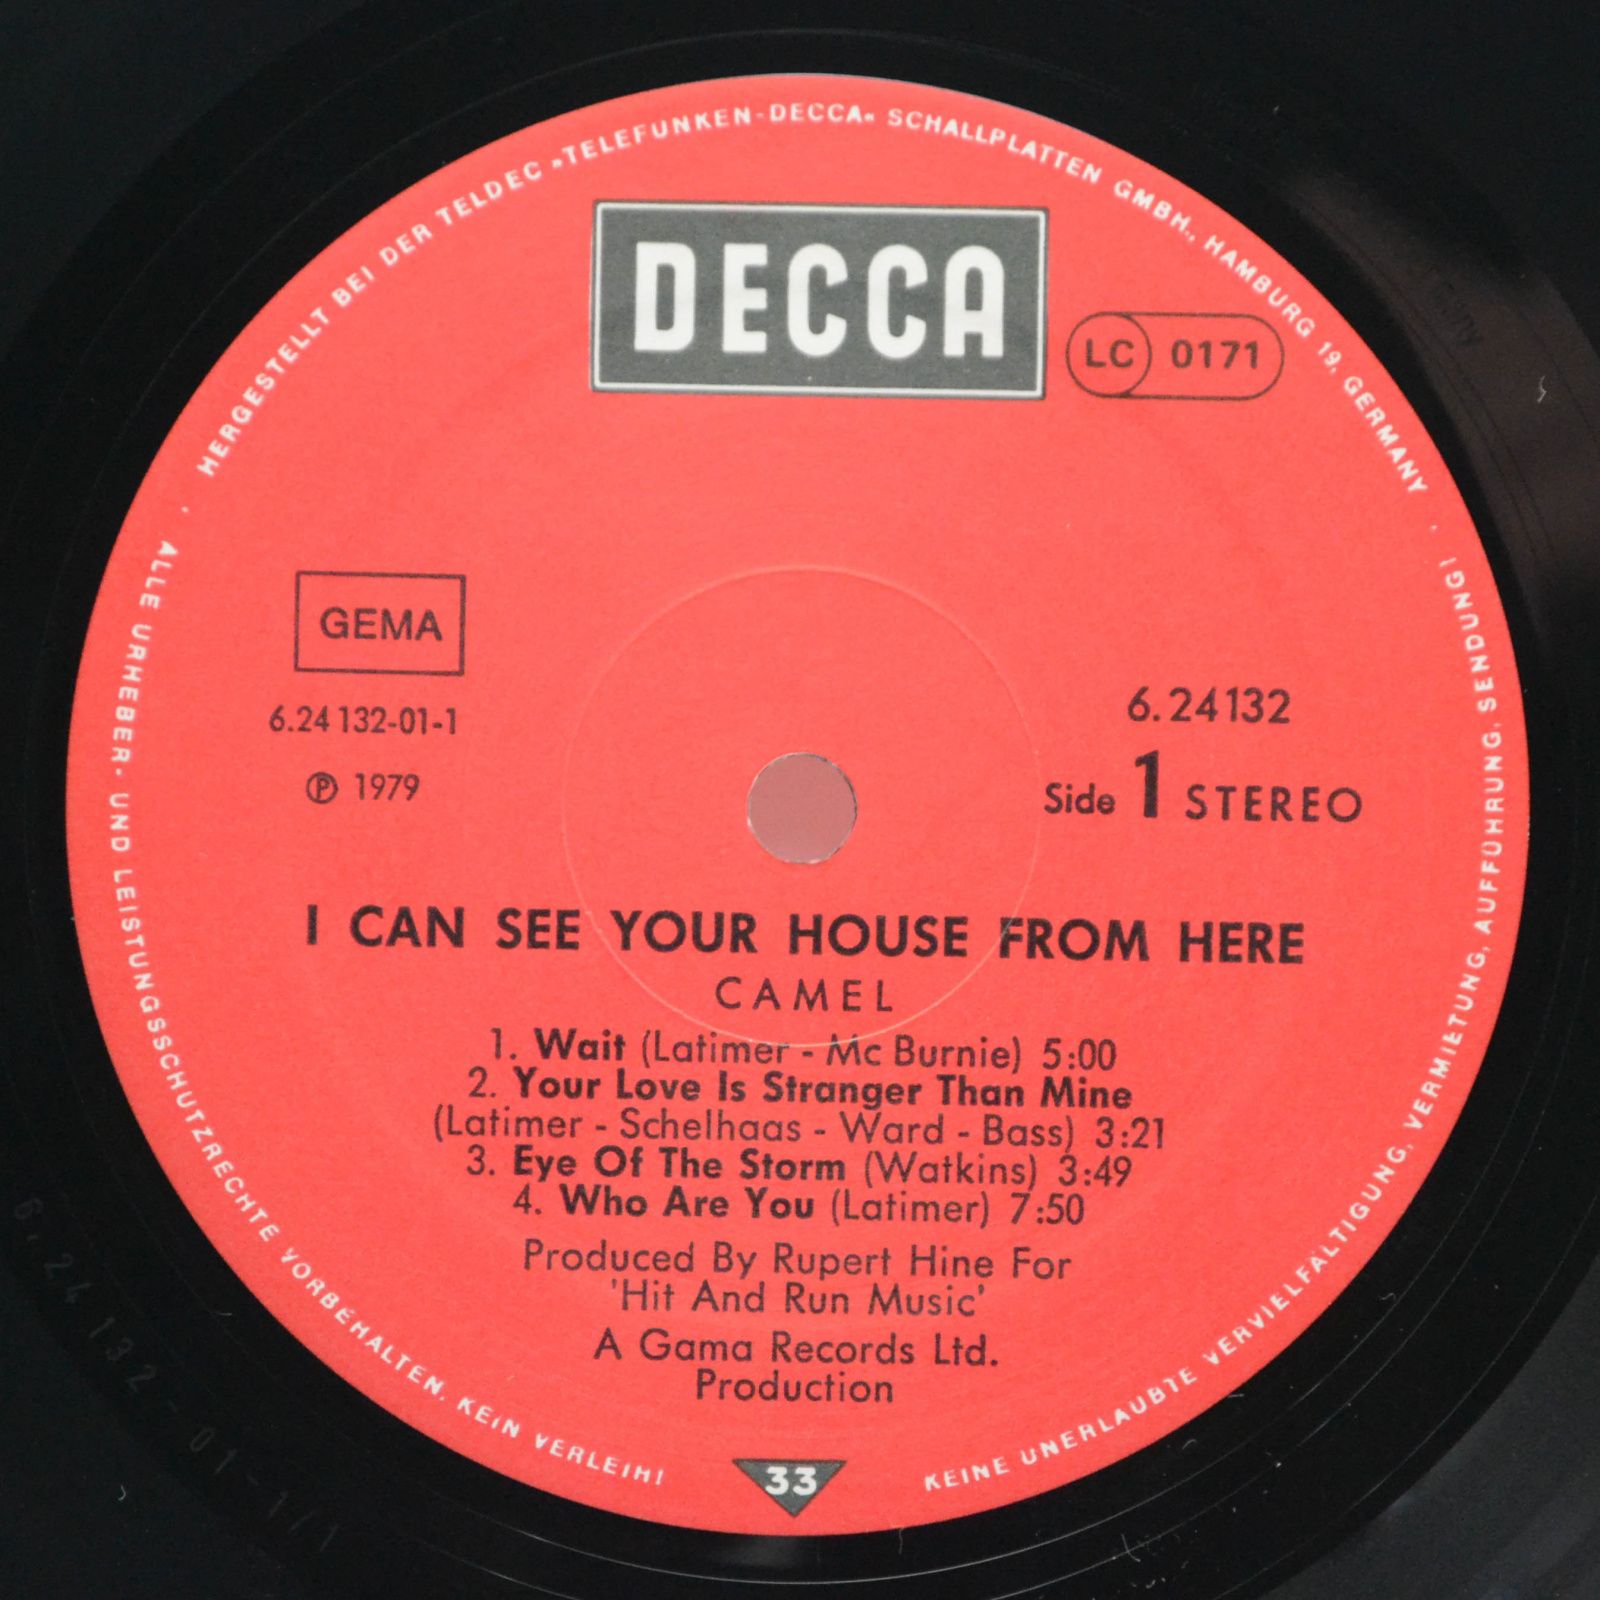 Camel — I Can See Your House From Here, 1979